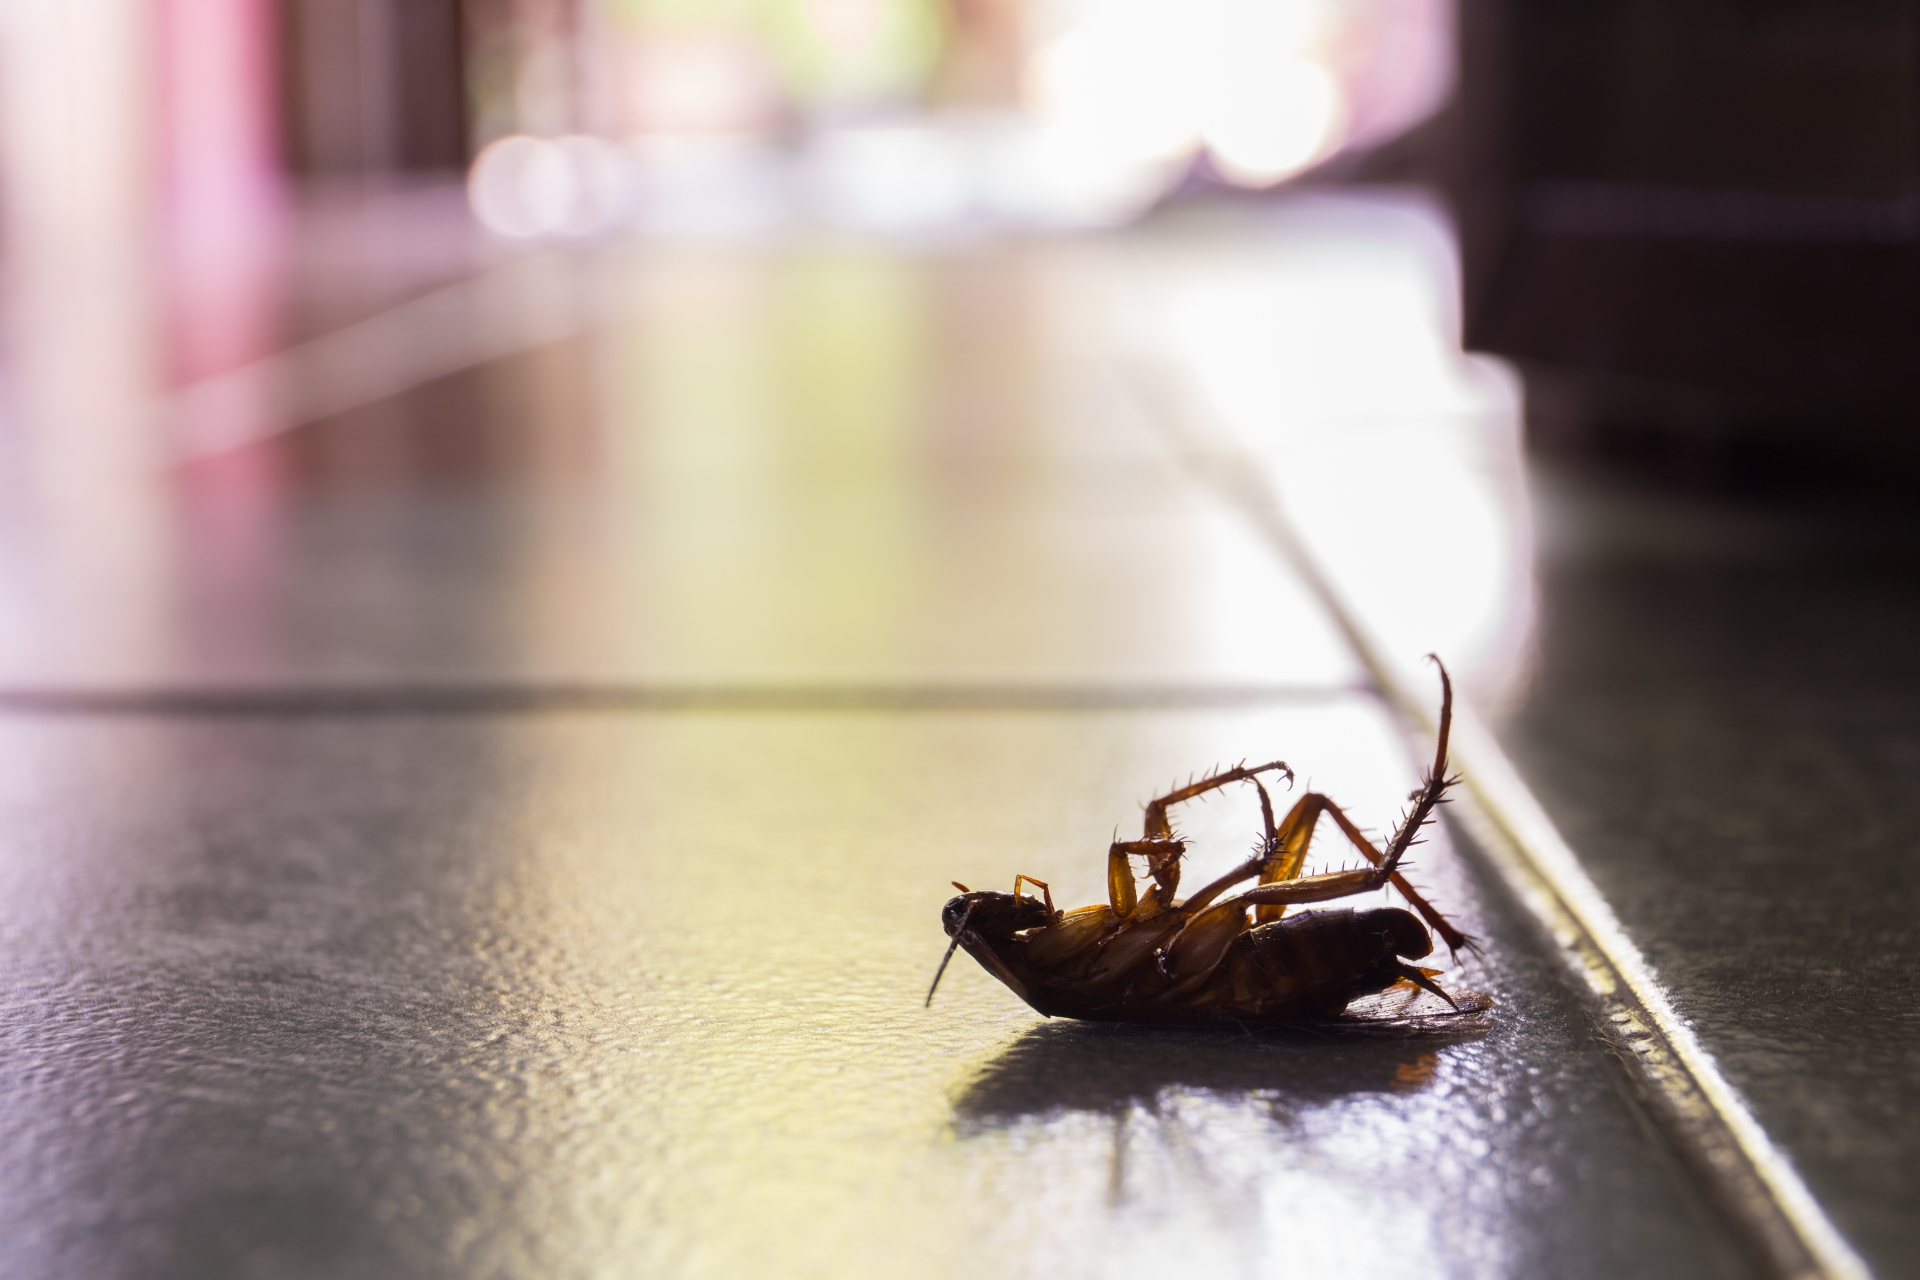 Cockroach Control, Pest Control in Lower Edmonton, N9. Call Now 020 8166 9746